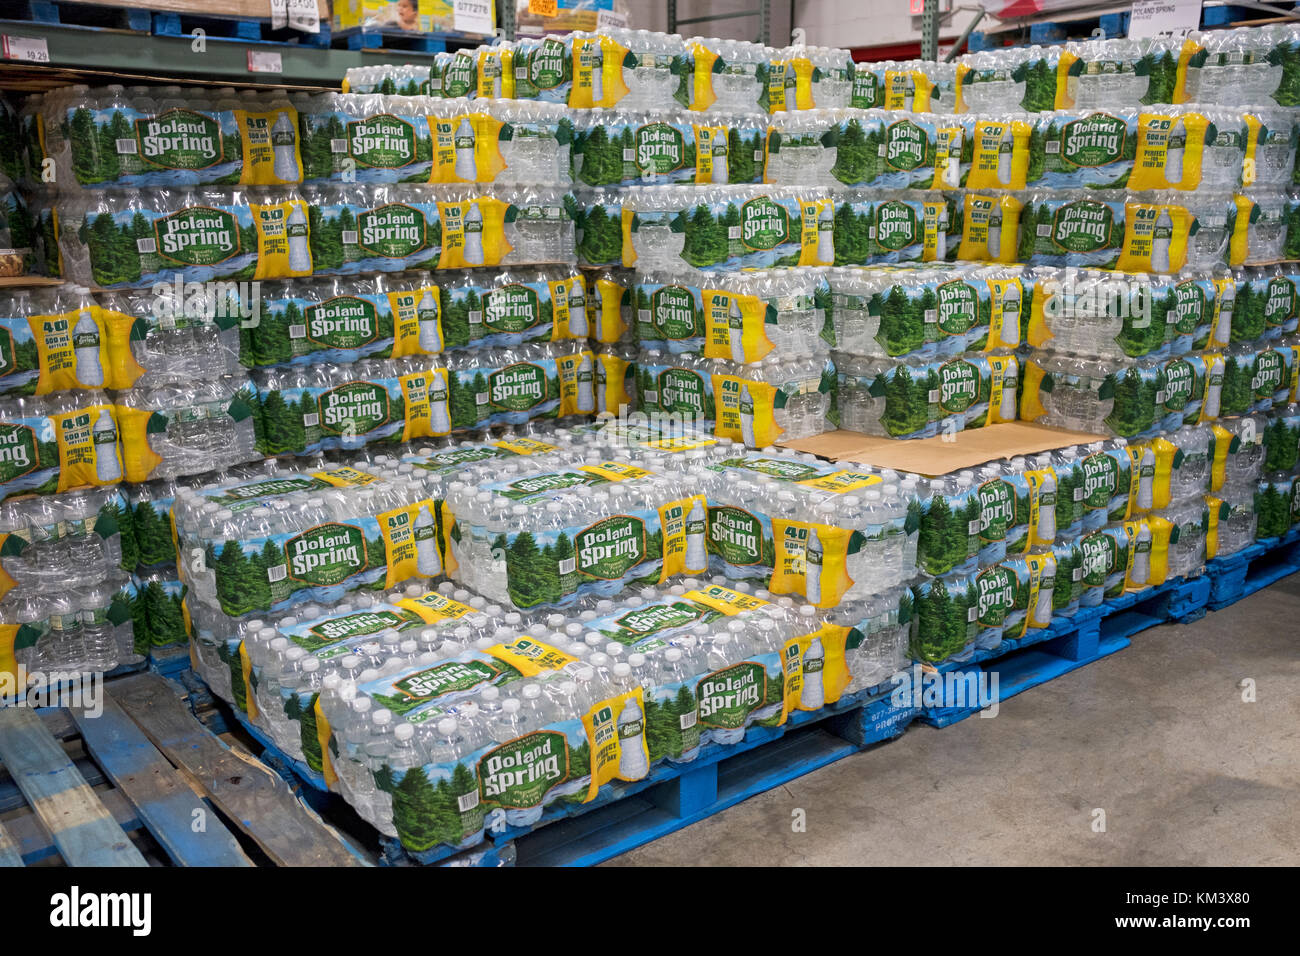 Cases of Poland Sping water sale at BJ's Wholesale Club in Whitestone, Queens, New York. Stock Photo